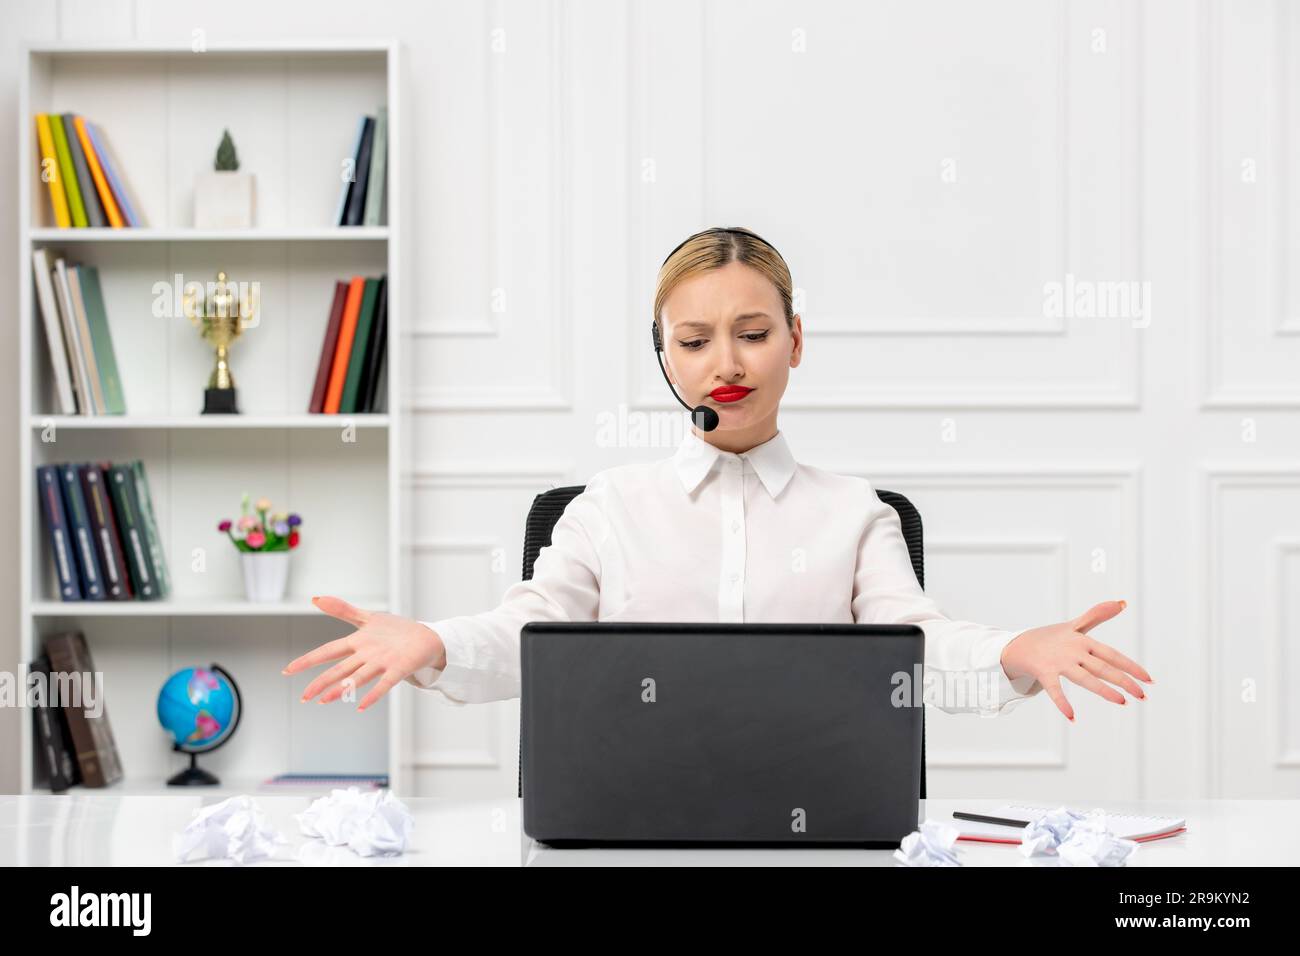 customer service cute blonde girl office shirt with headset and computer waving hands not happy Stock Photo